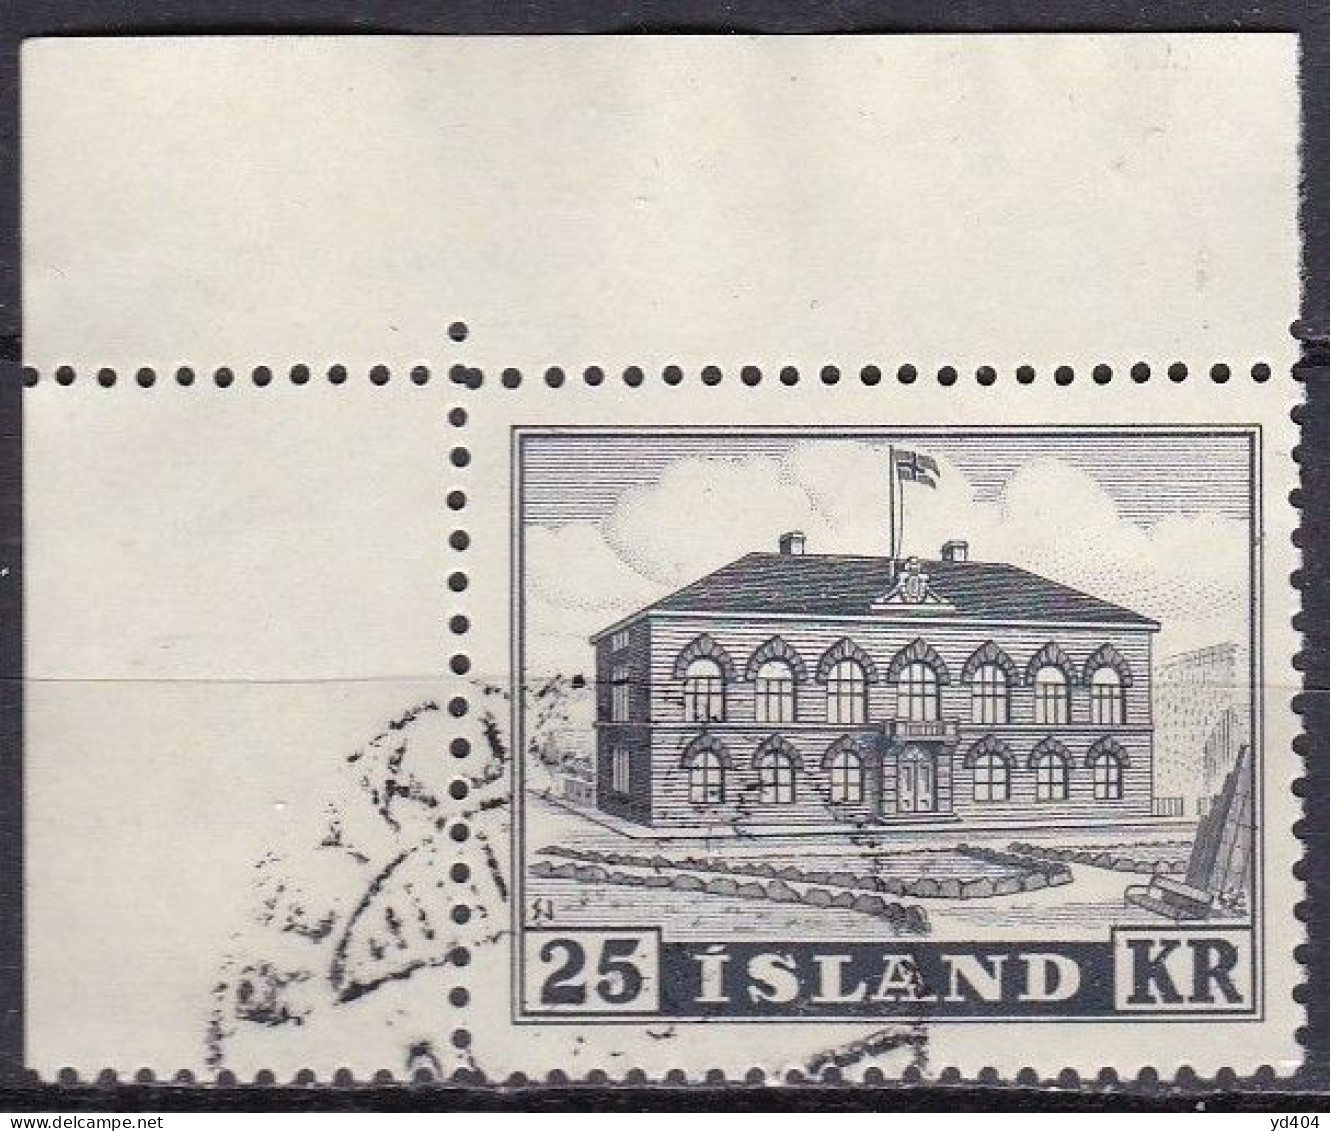 IS054 – ISLANDE – ICELAND – 1952 – PARLIAMENT BUILDING – Y&T # 238 - USED 20 € - Used Stamps